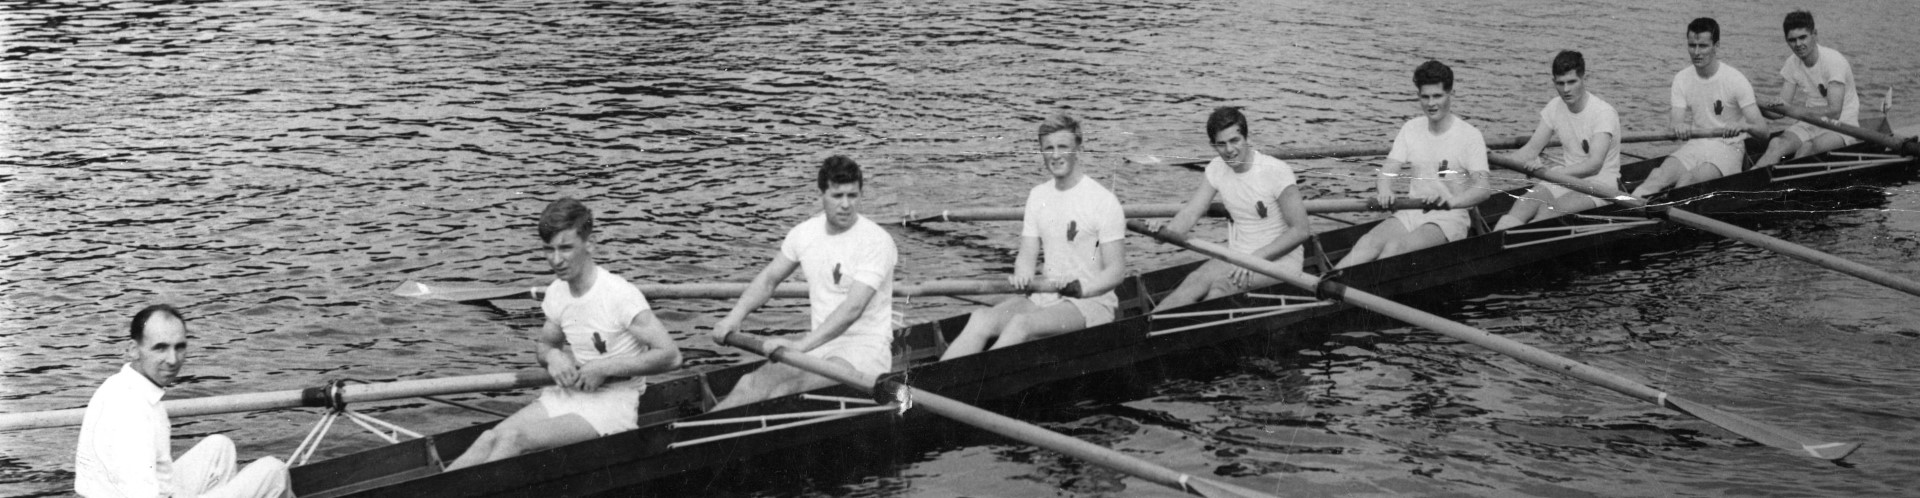 bobby-coxing-an-ulster-mens-eight